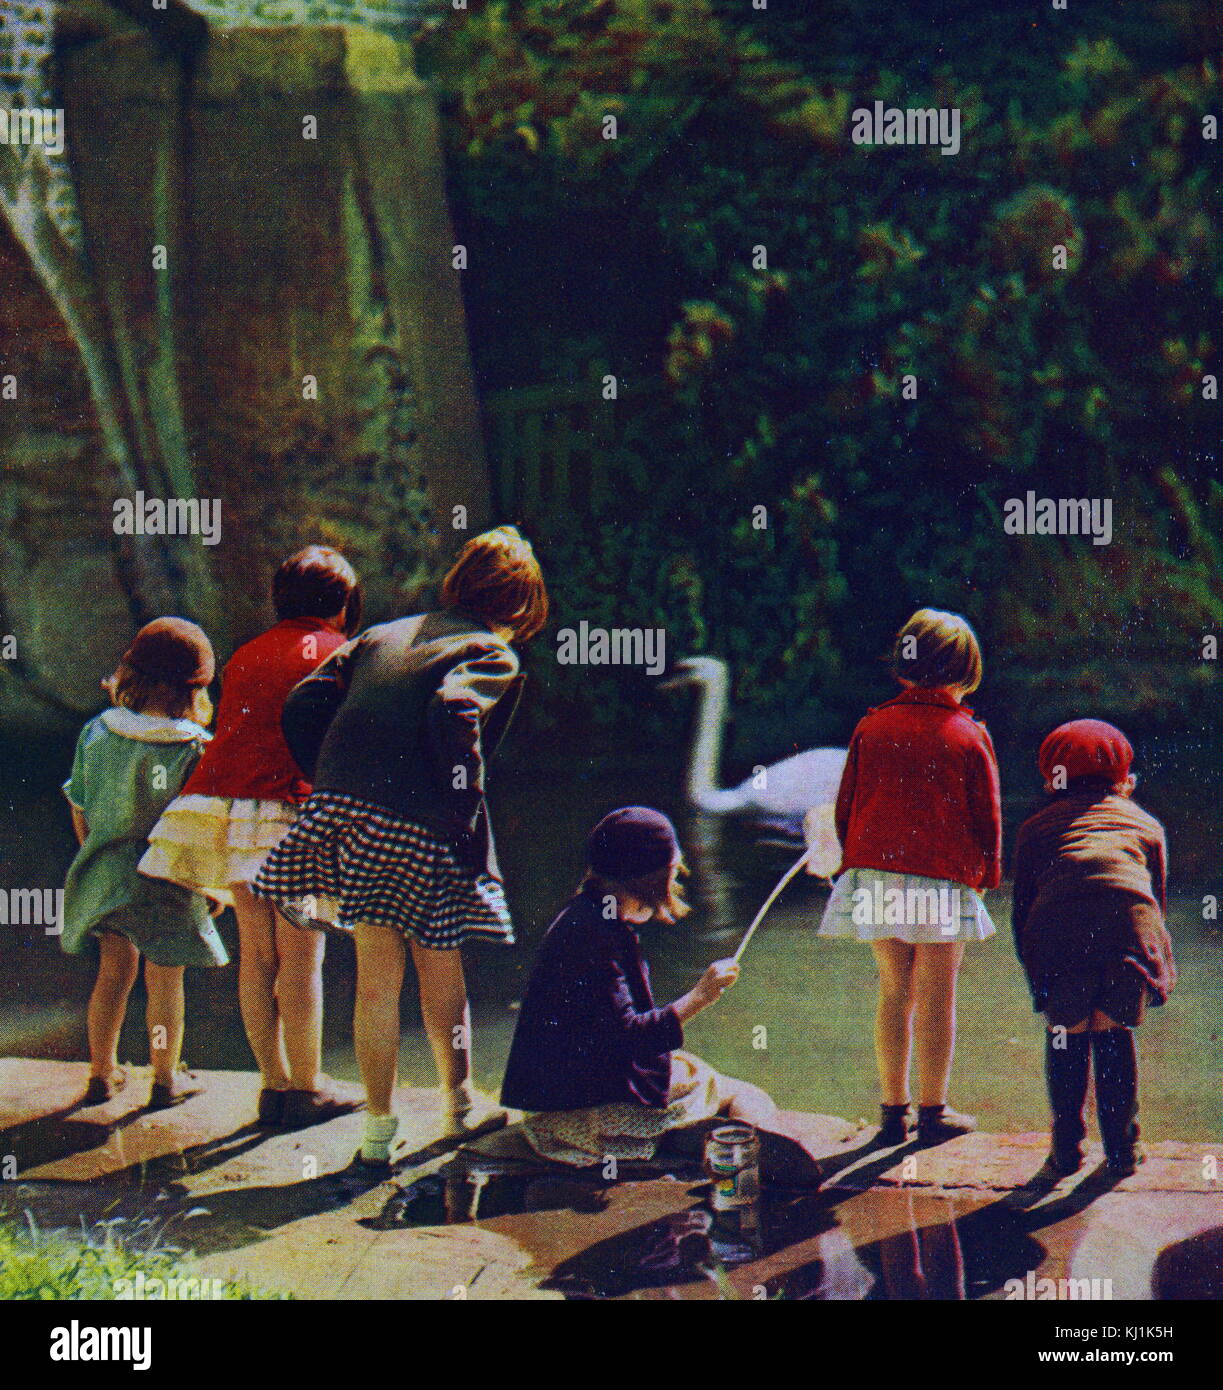 Example of early colour photography from the 1930s. Dated 20th Century Stock Photo